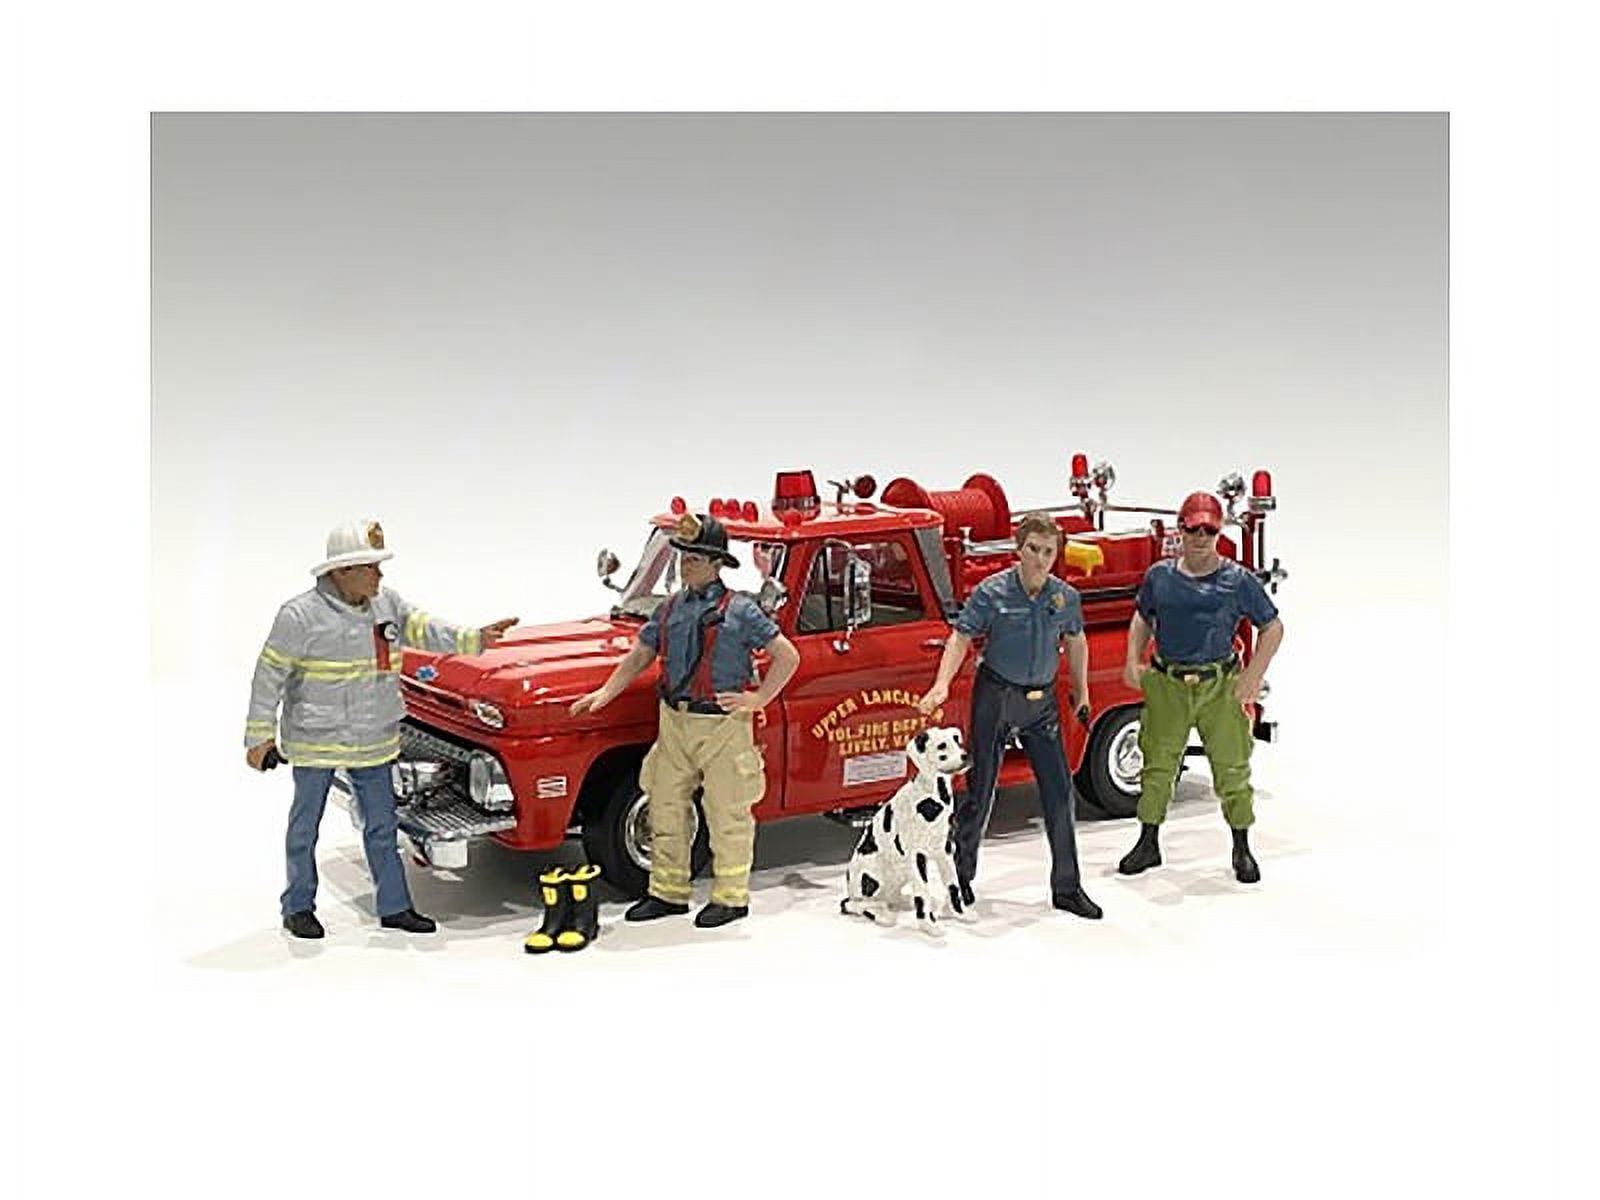 Picture of American Diorama 76418-76419-76420-76421 Firefighters 4 Males 1 Dog 1 Accessory Figure Set for 1 by 24 Scale Models - 6 Piece